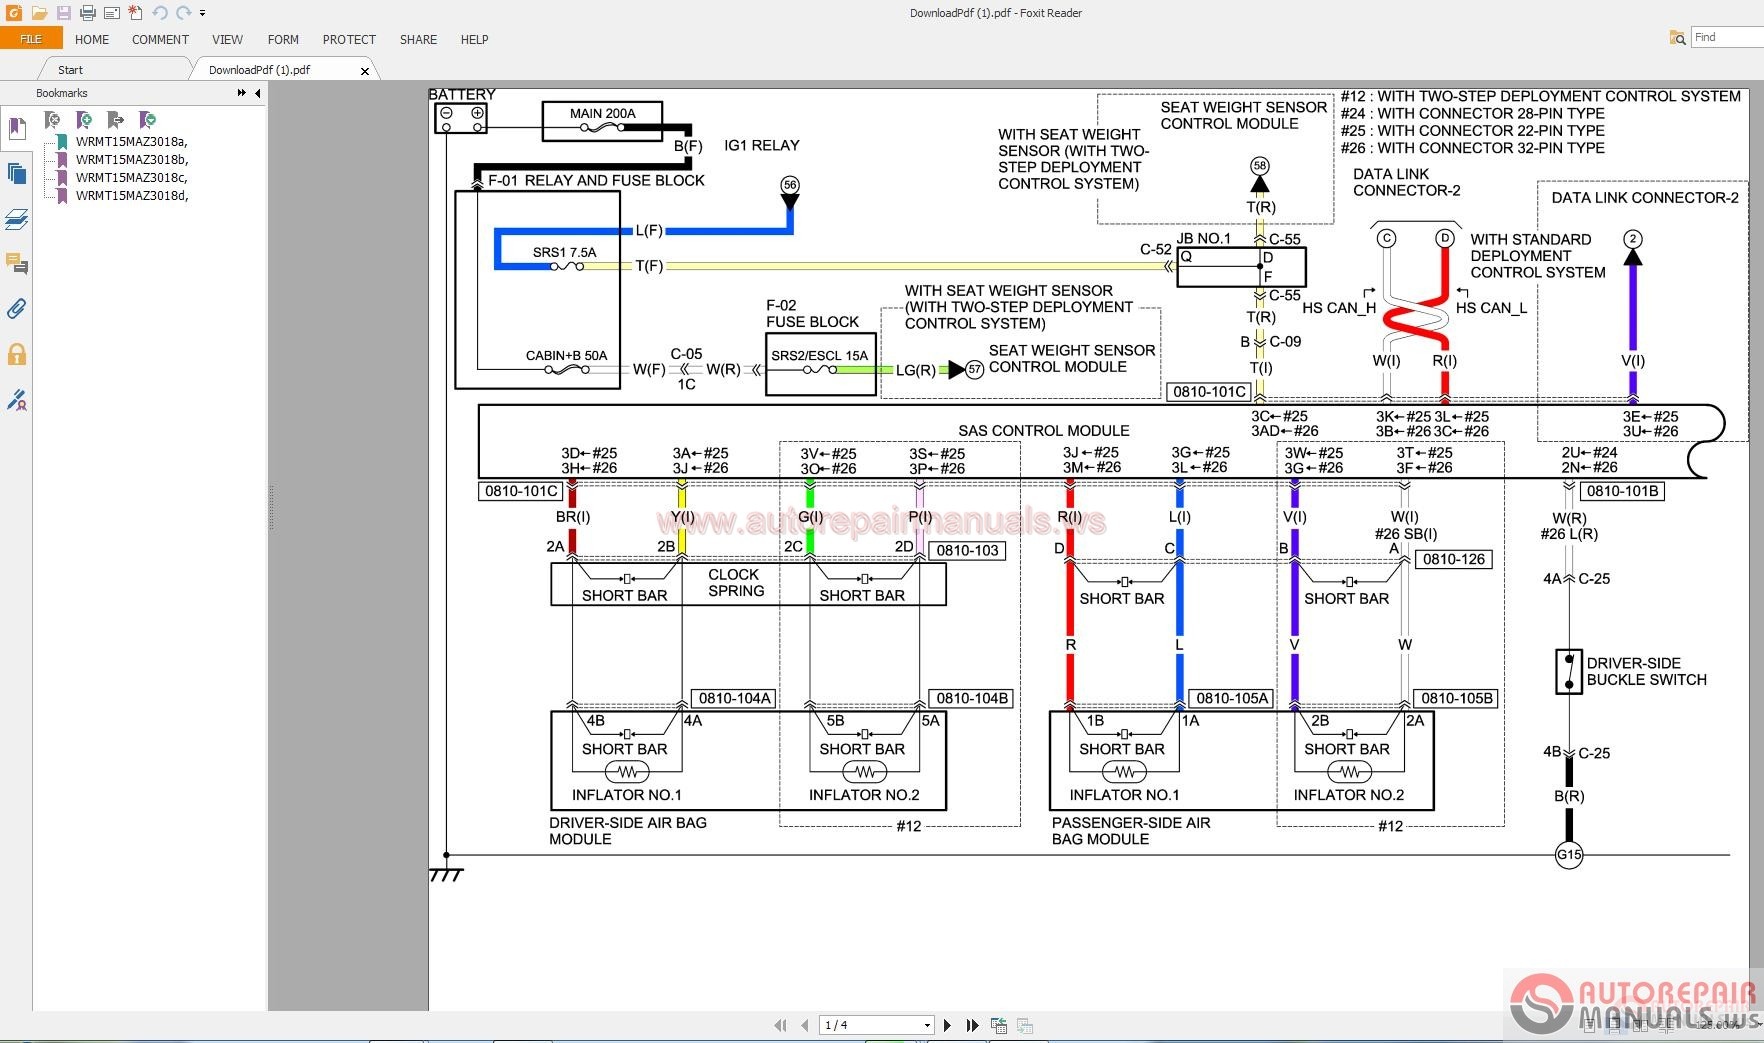 2015 Mazda Bose Factory Wiring Diagram For Car Stereo from img.autorepairmanuals.ws